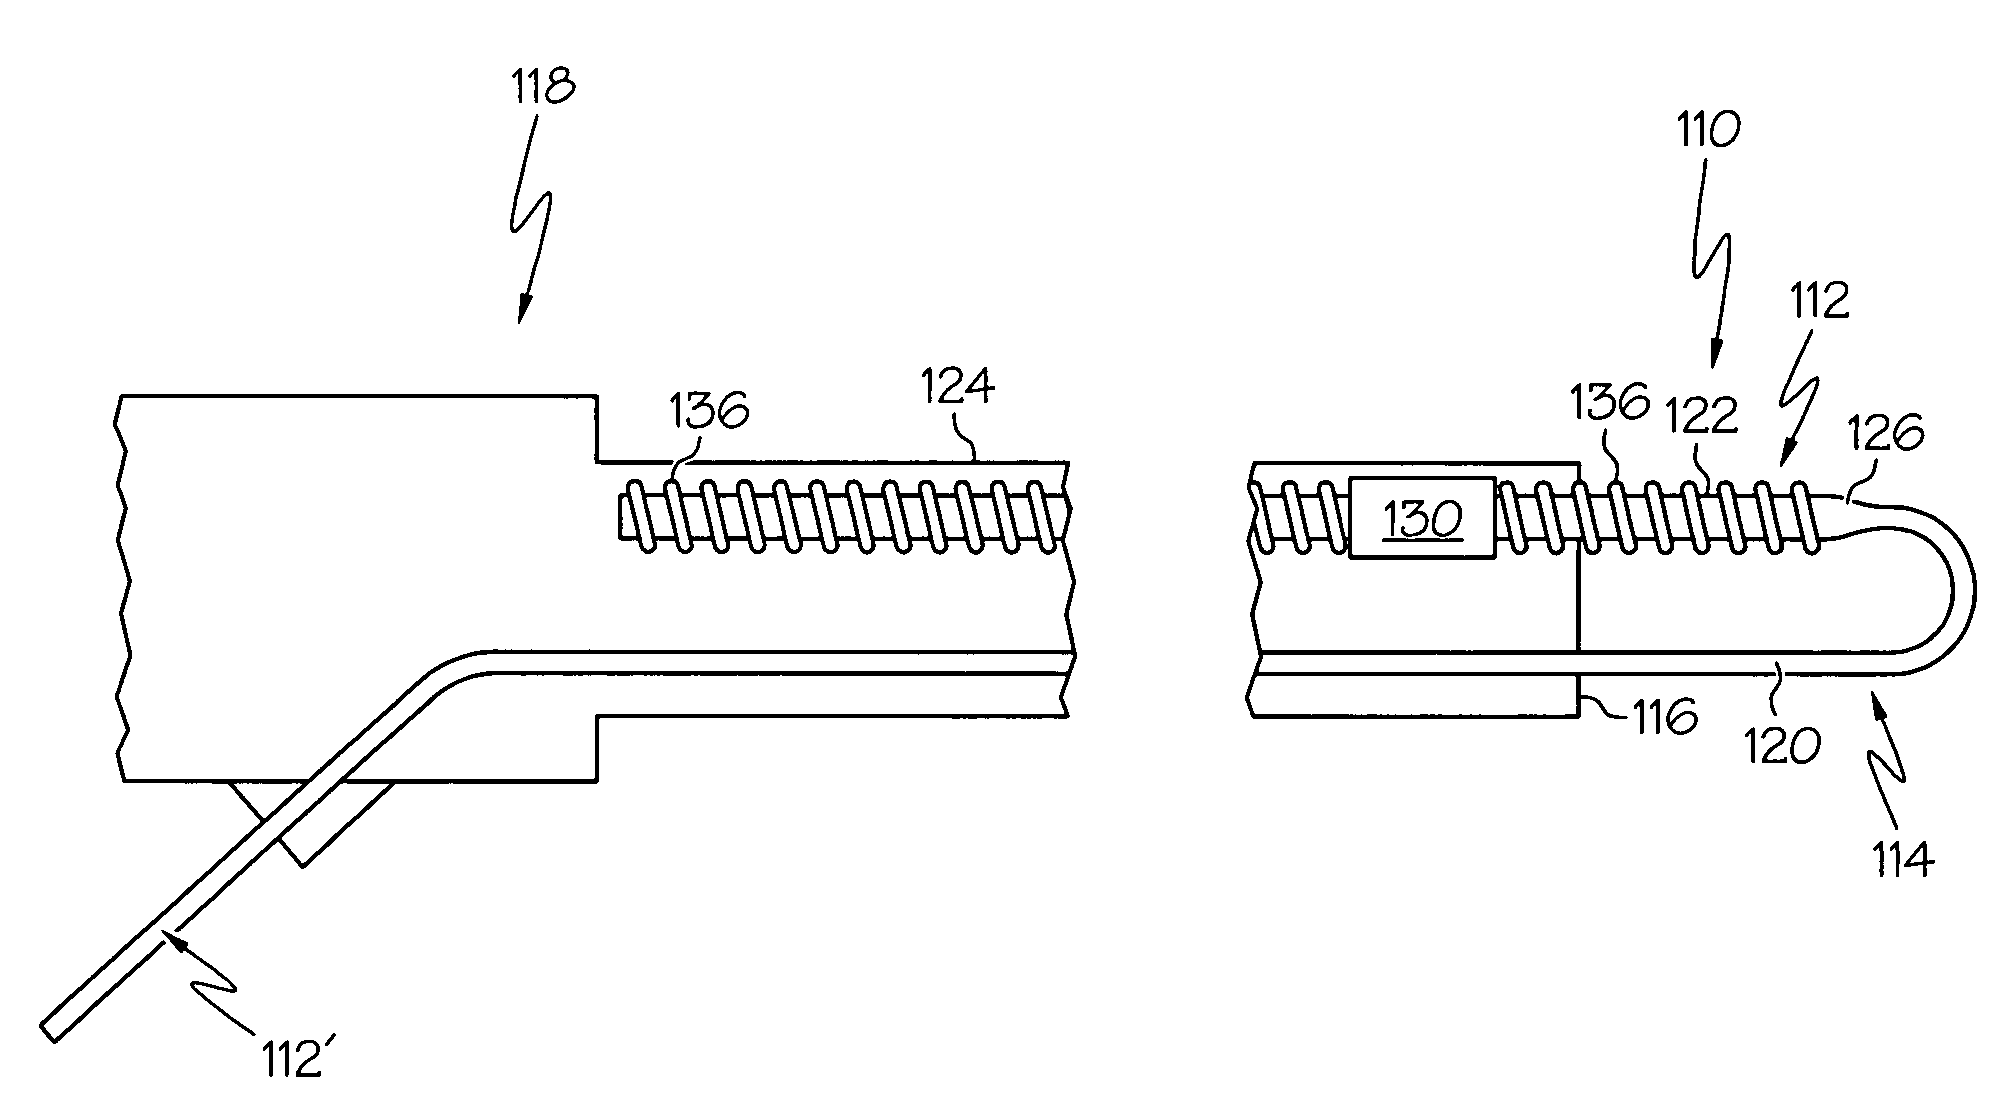 Medical instrument having a catheter and a medical guidewire